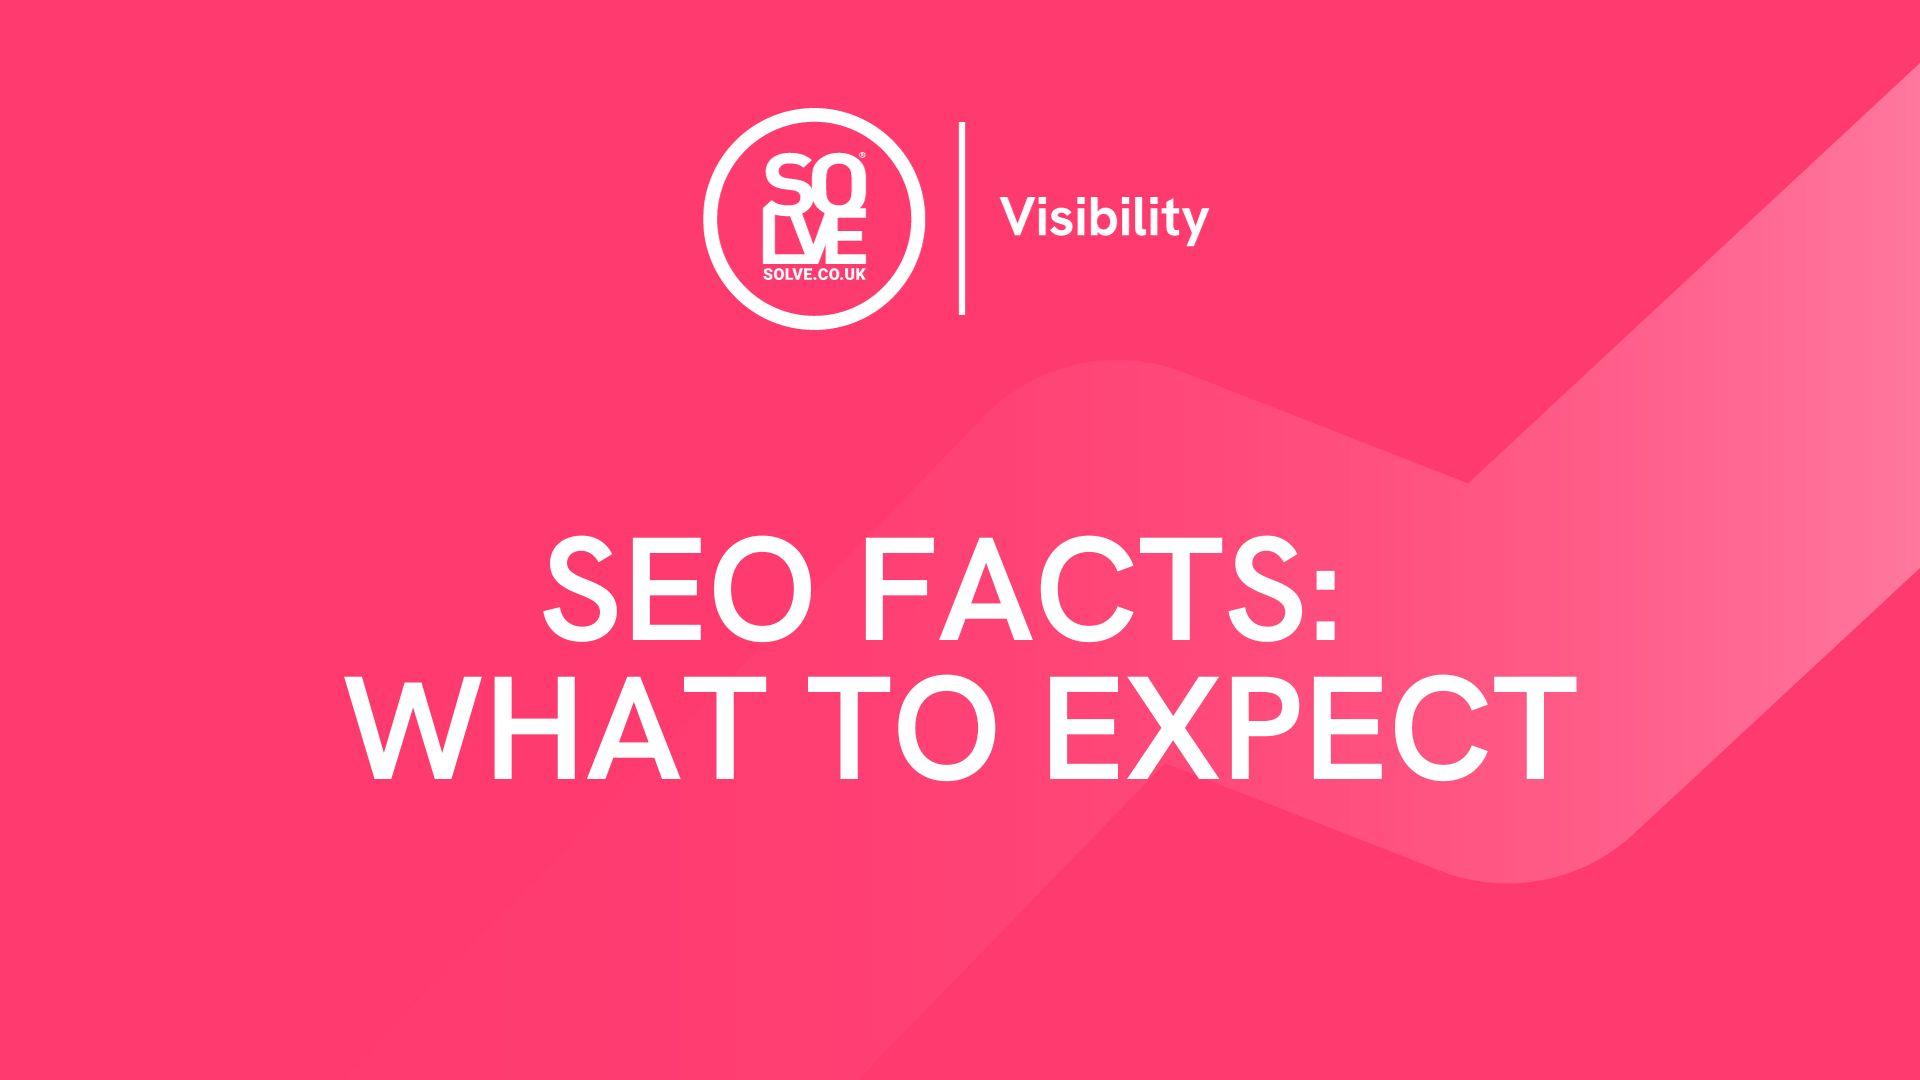 SEO Facts: What to expect